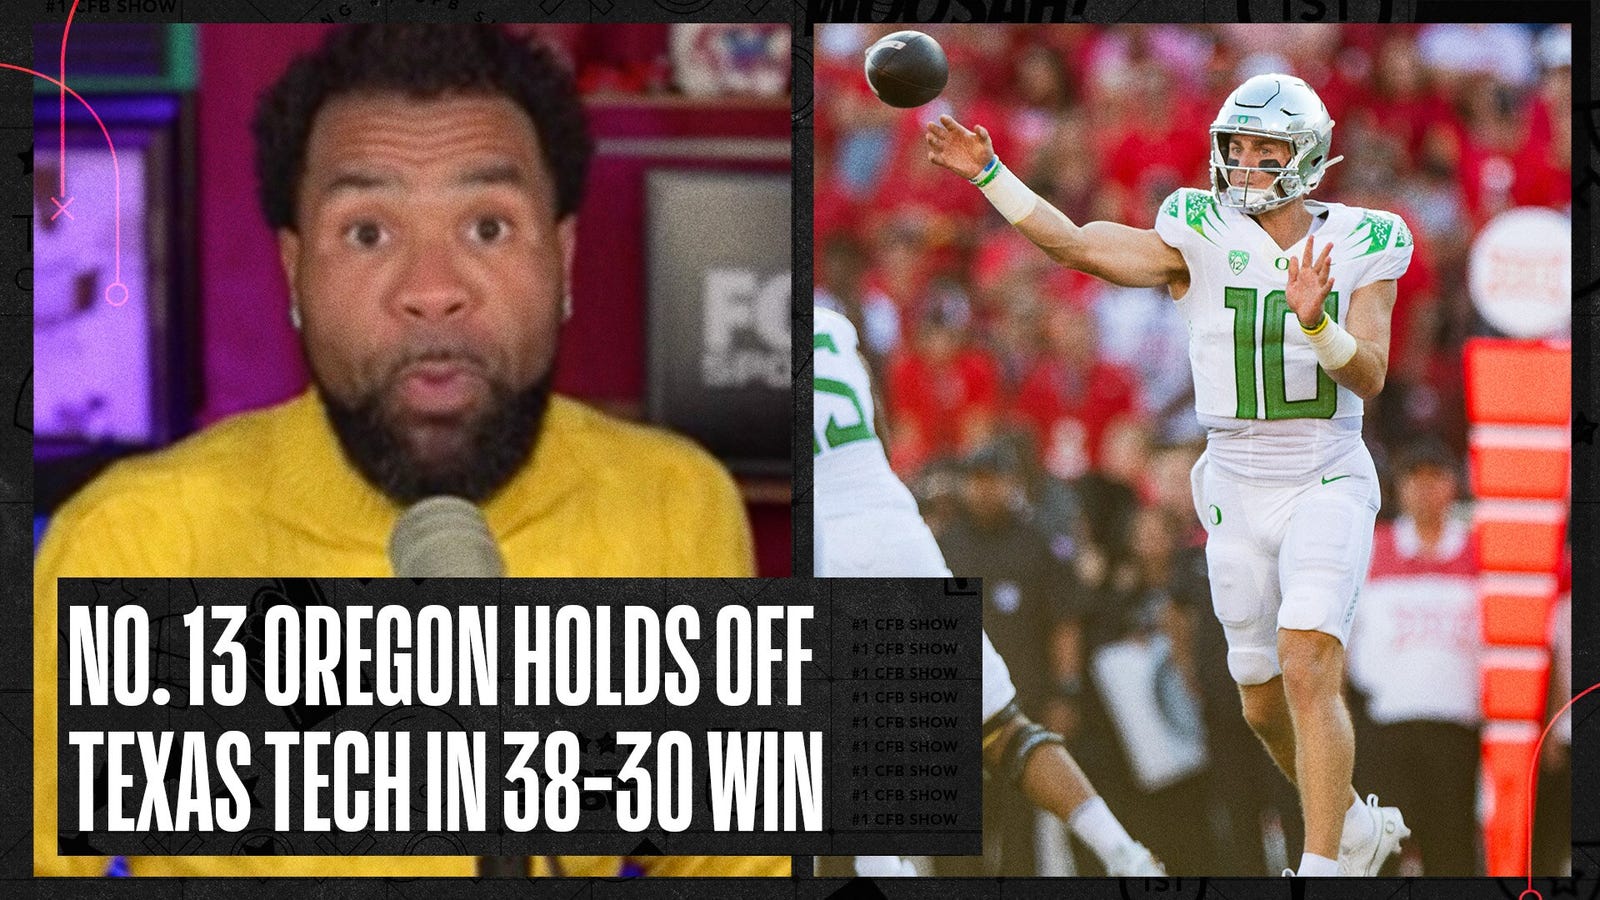 No. 13 Oregon holds off Texas Tech with a 38-30 win